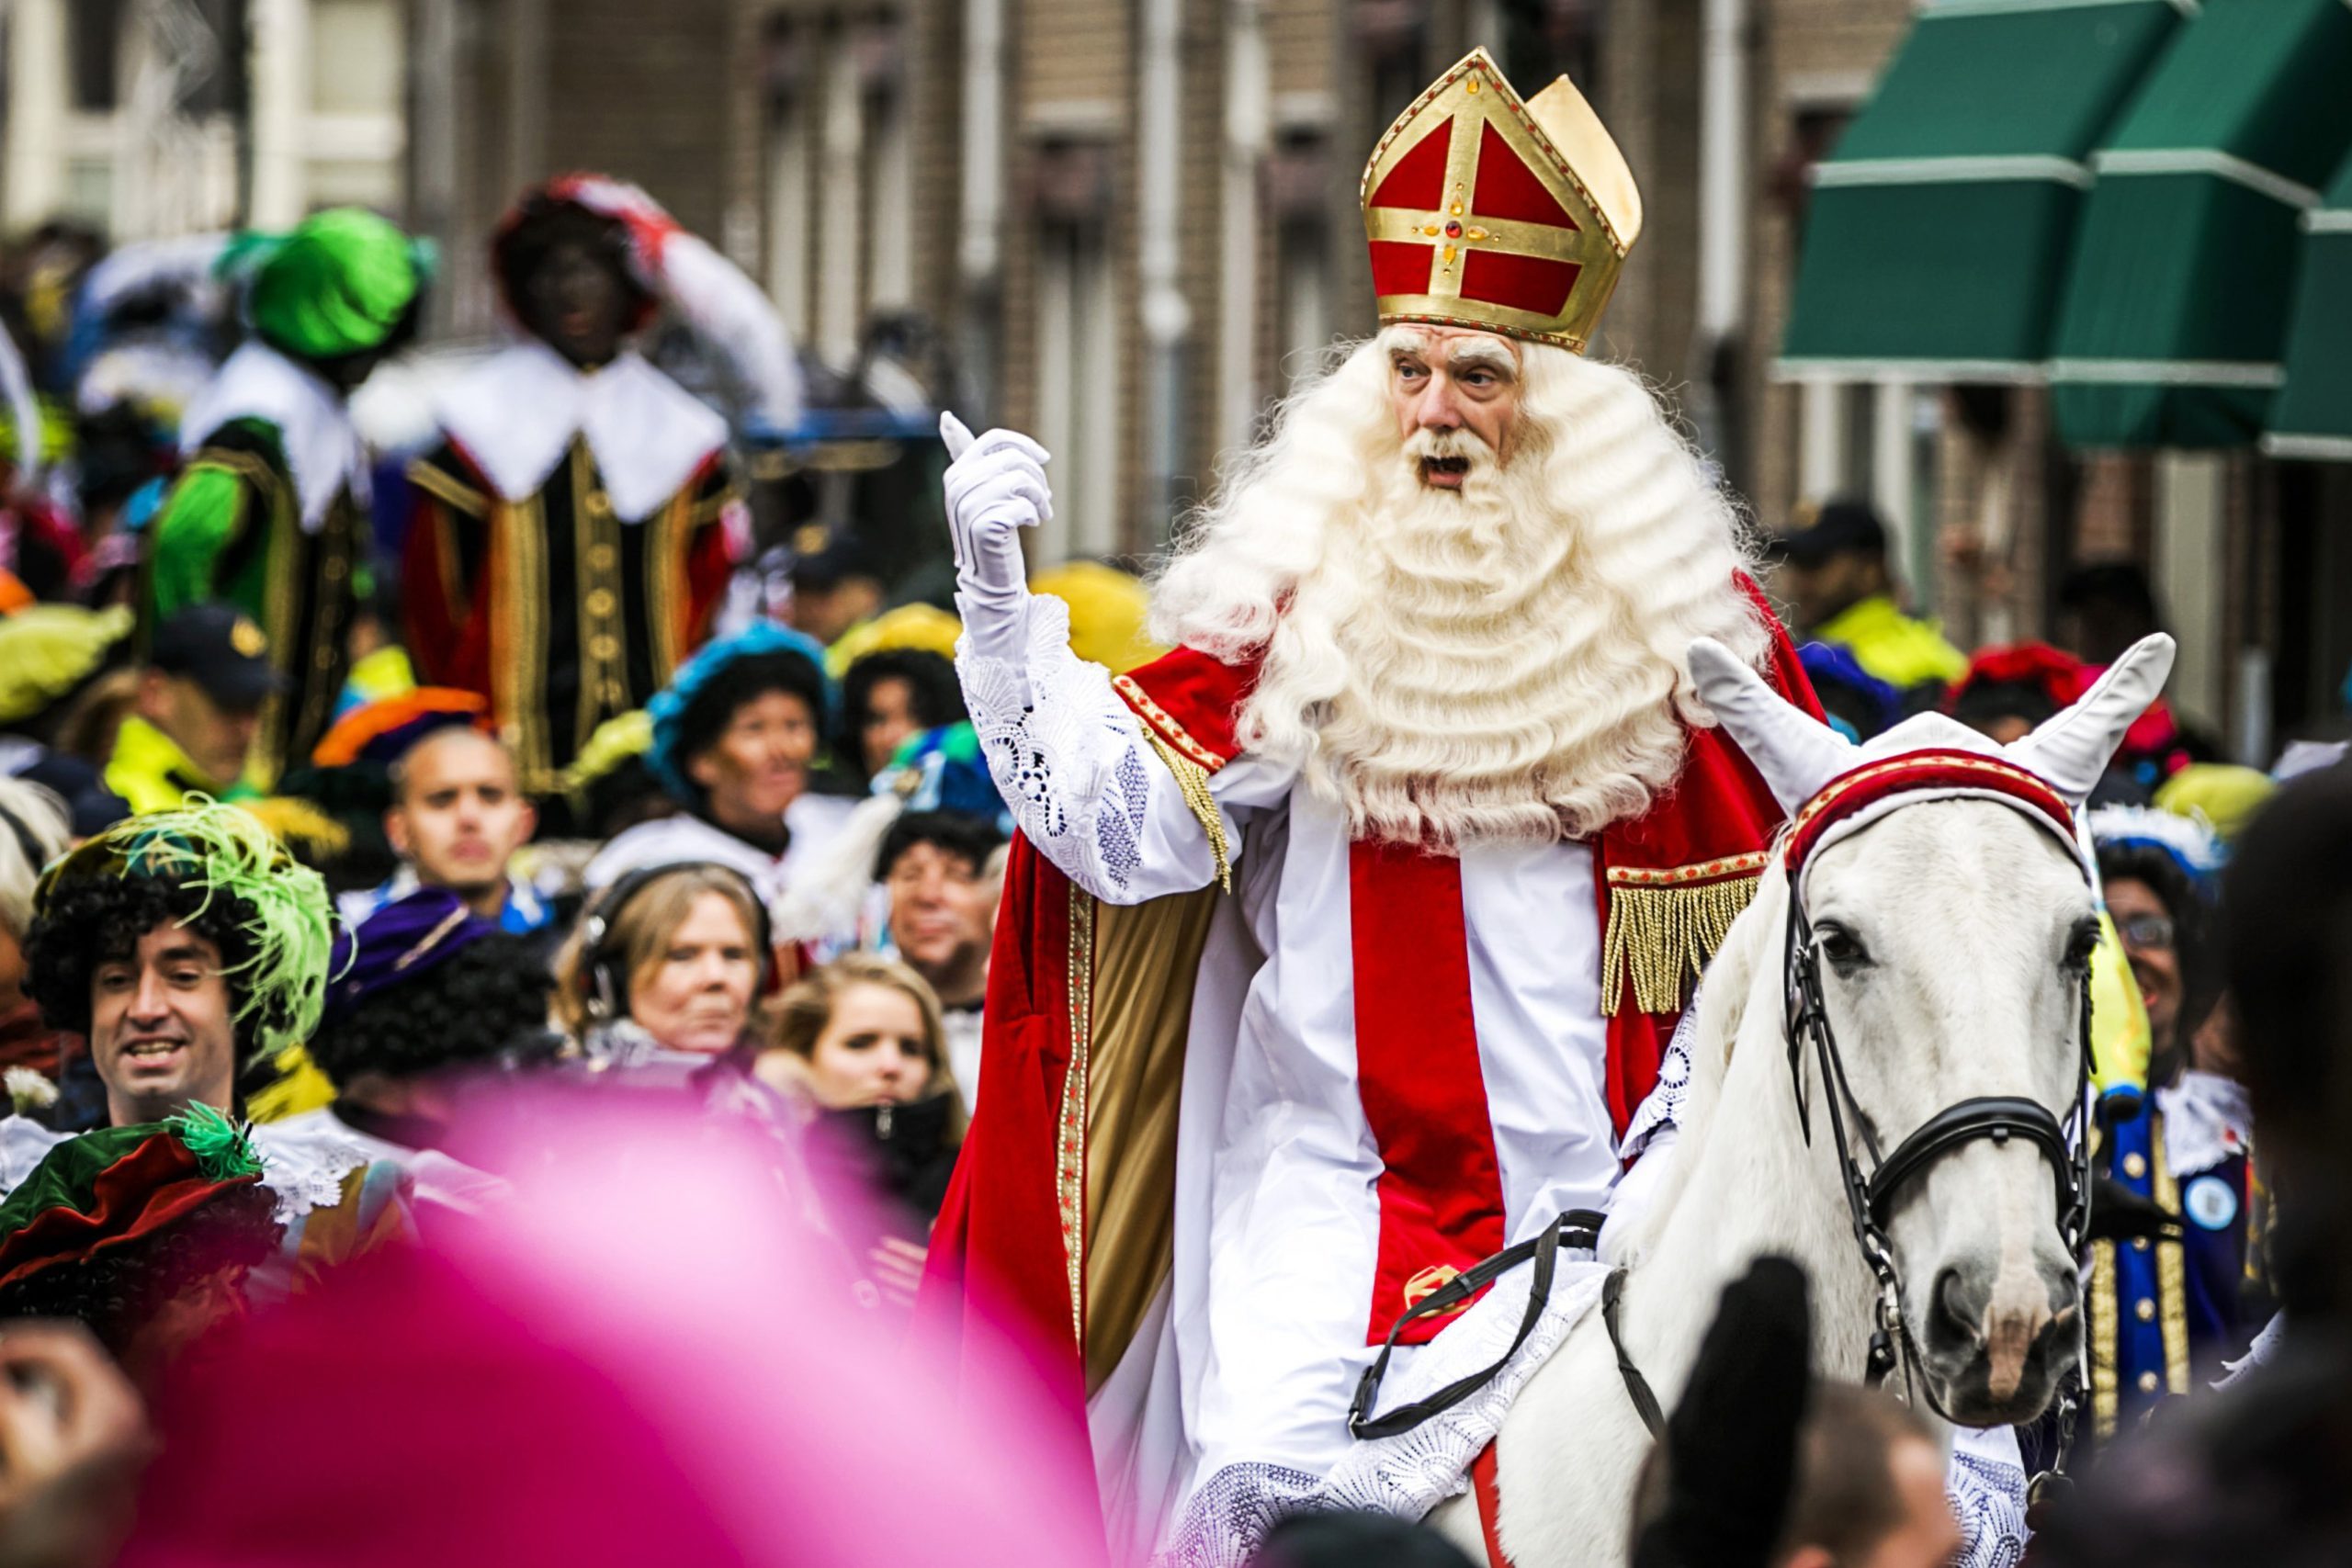 <p>Sinterklaas is still celebrated in the Netherlands on St. Nicholas's feast day, Dec. 6. He shares some similarities with Santa, such as his white beard, but he's dressed as a bishop in traditional Catholic red robes (this is also why Santa Claus wears red, one of the traditional <a href="https://www.rd.com/article/christmas-colors-green-red/" rel="noopener noreferrer">Christmas colors</a>). Sinterklaas rides a white horse, a holdover from the Norse god Odin, who flew on a horse during the winter solstice celebration of Yule. Since St. Nicholas's feast day was near the solstice, it was also combined with elements of solstice holidays, Brown says.</p>